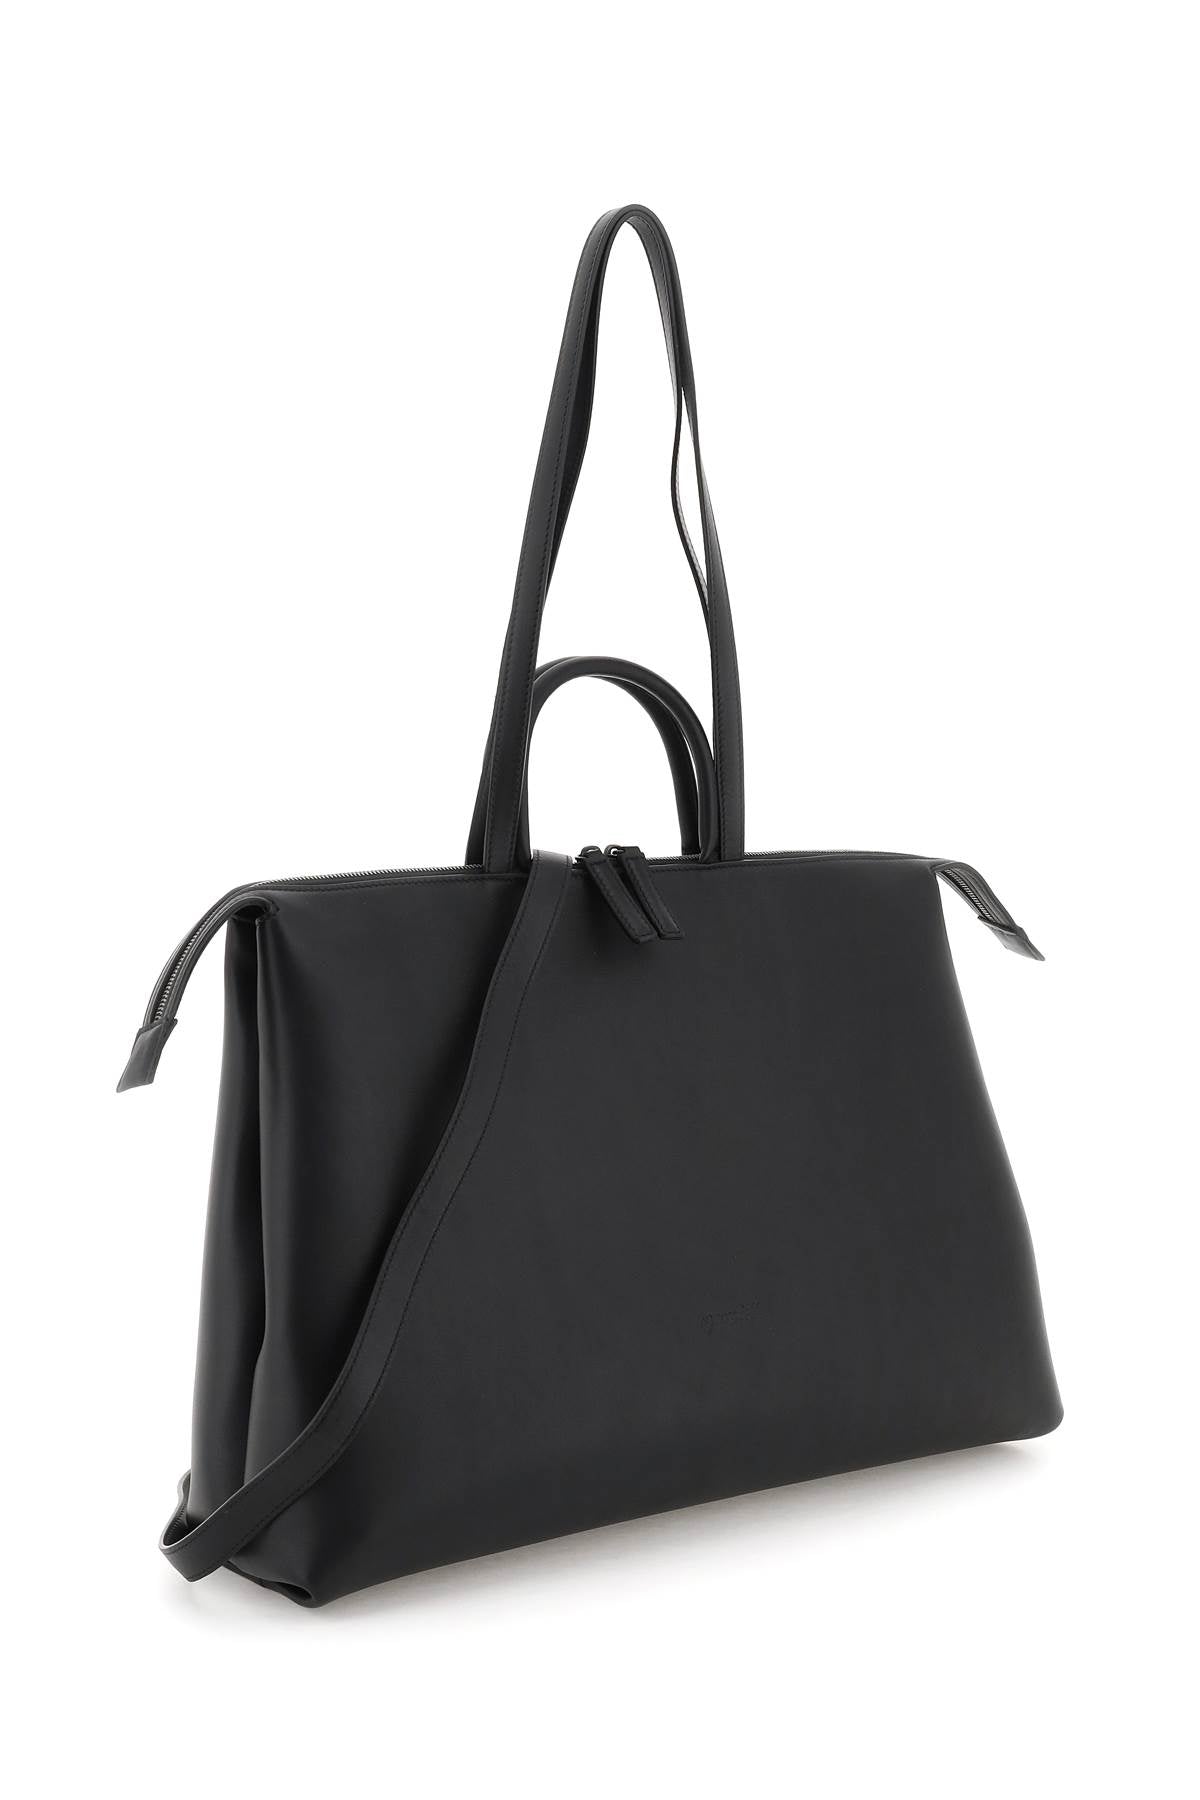 Marsell '4 In Orizzontale' Shoulder Bag   Nero